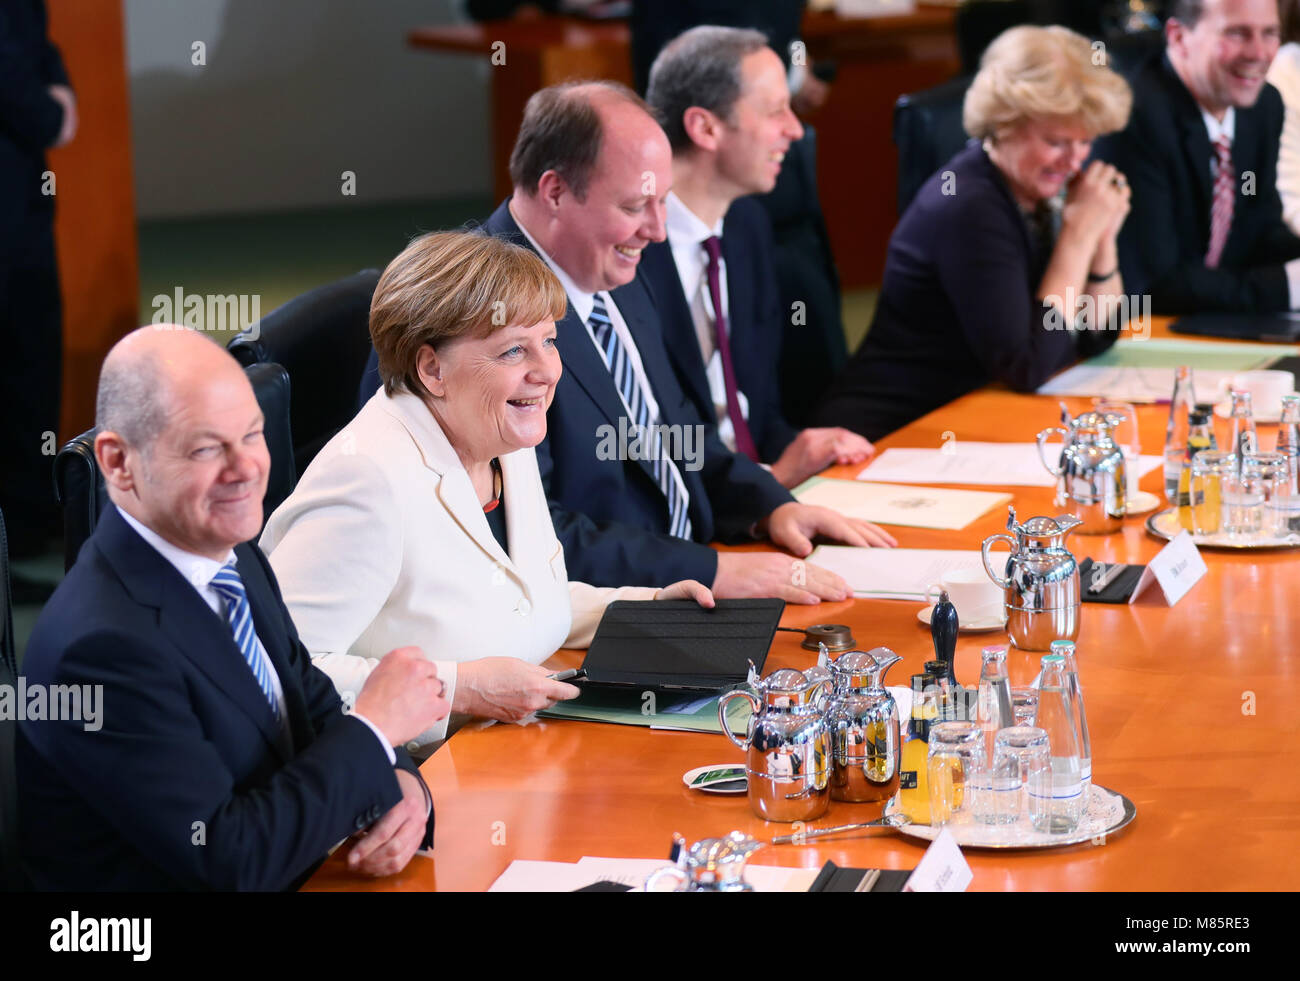 14 March 2018, Germany, Berlin: Olaf Scholz of the Social Democratic Party (SPD), German Minister of Finance, German Chancellor Angela Merkel of the Christian Democratic Union (CDU), Helge Braun (CDU), Chancellery Chief of Staff, Hendrik Hoppenstedt (CDU), State Minister for the cooperation between the Federation and the federal states, Monika Gruetters (CDU), State Minister for Cultural and Media Affairs, and government spokesman Steffen Seibert take part in the first German cabinet meeting at the Federal Chancellery after the swearing-in of the German Chancellor and the German Ministers. Pho Stock Photo